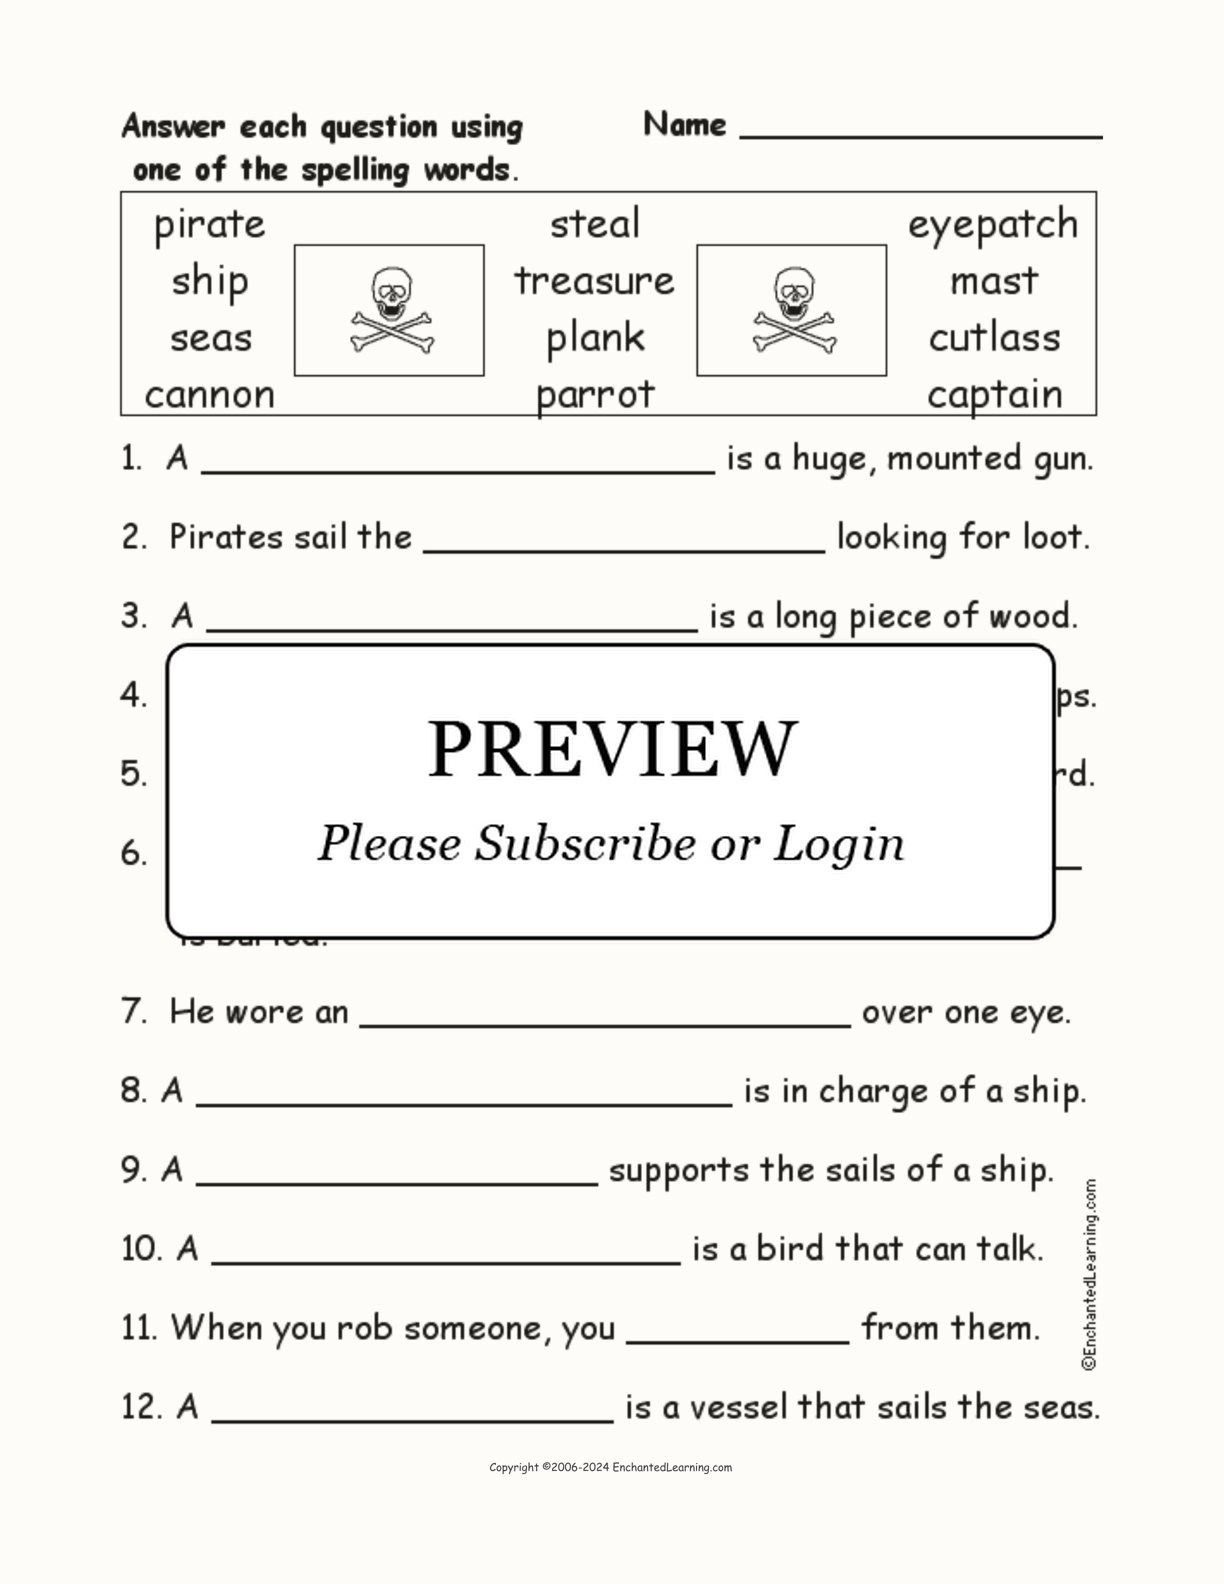 Pirate Spelling Word Questions interactive worksheet page 1